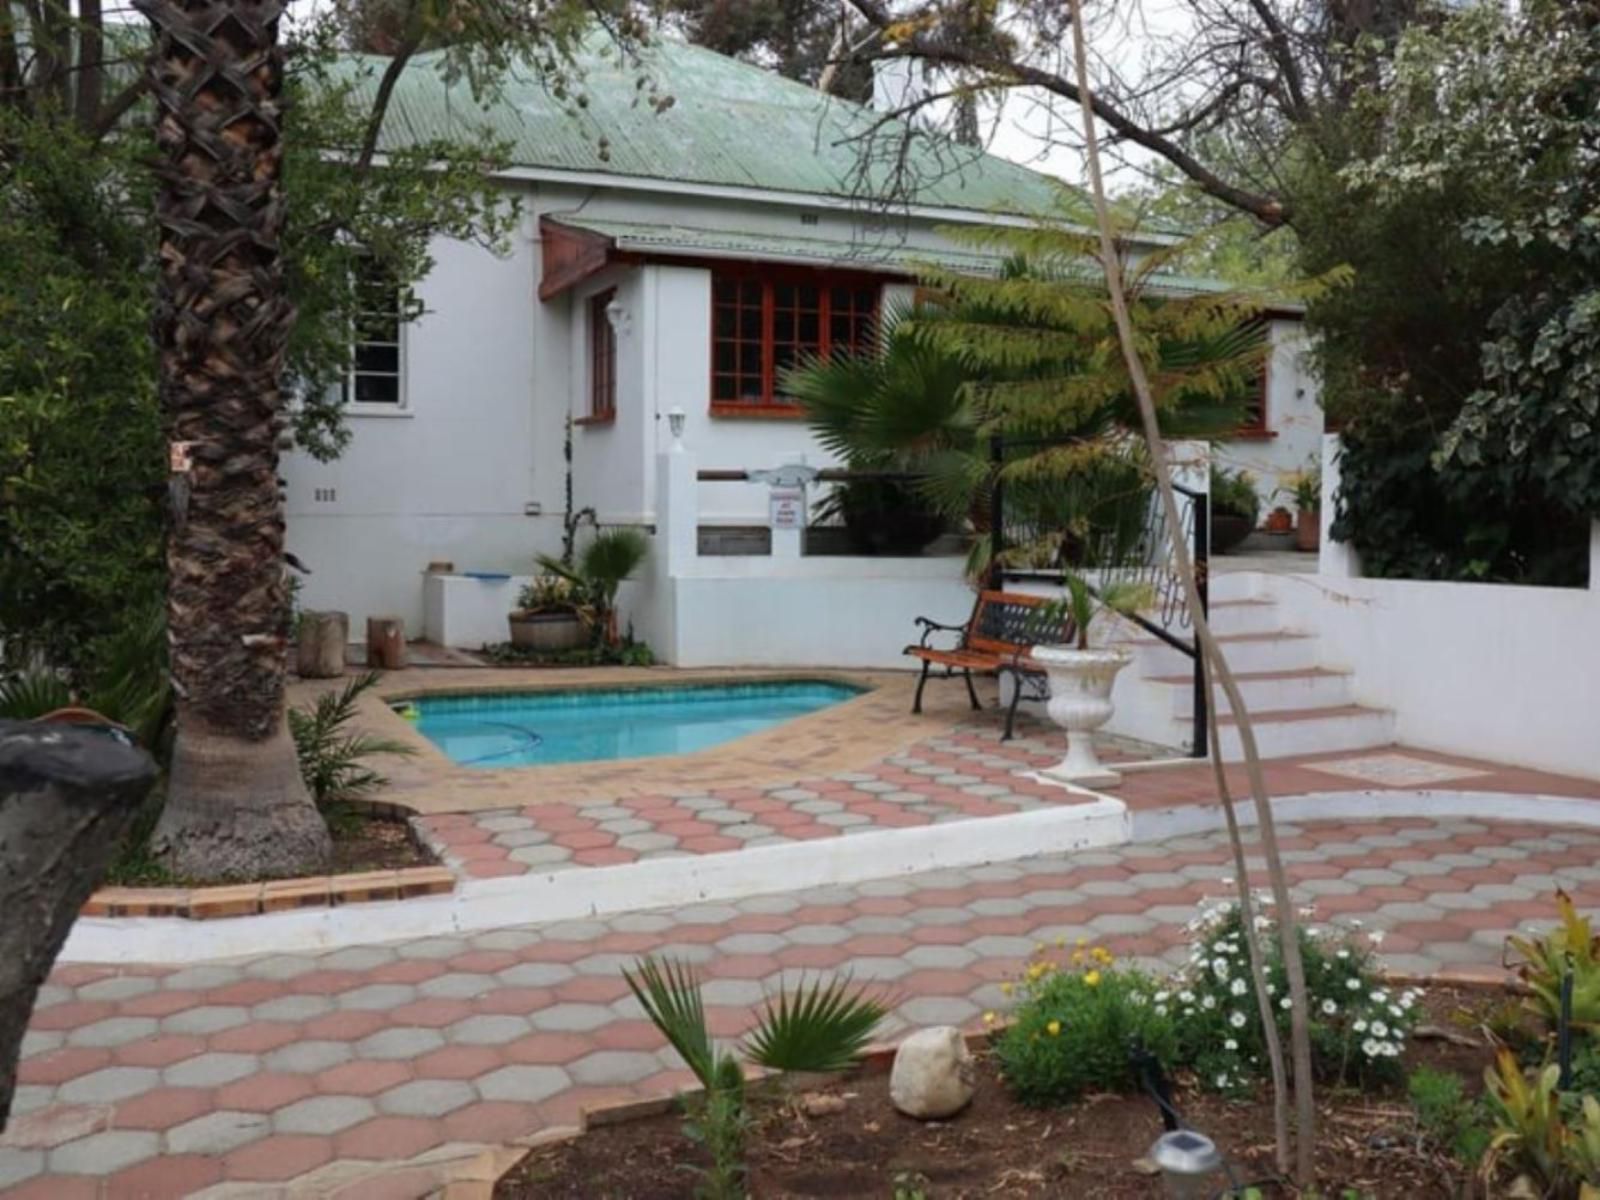 Old Mill Lodge Springbok Northern Cape South Africa House, Building, Architecture, Swimming Pool